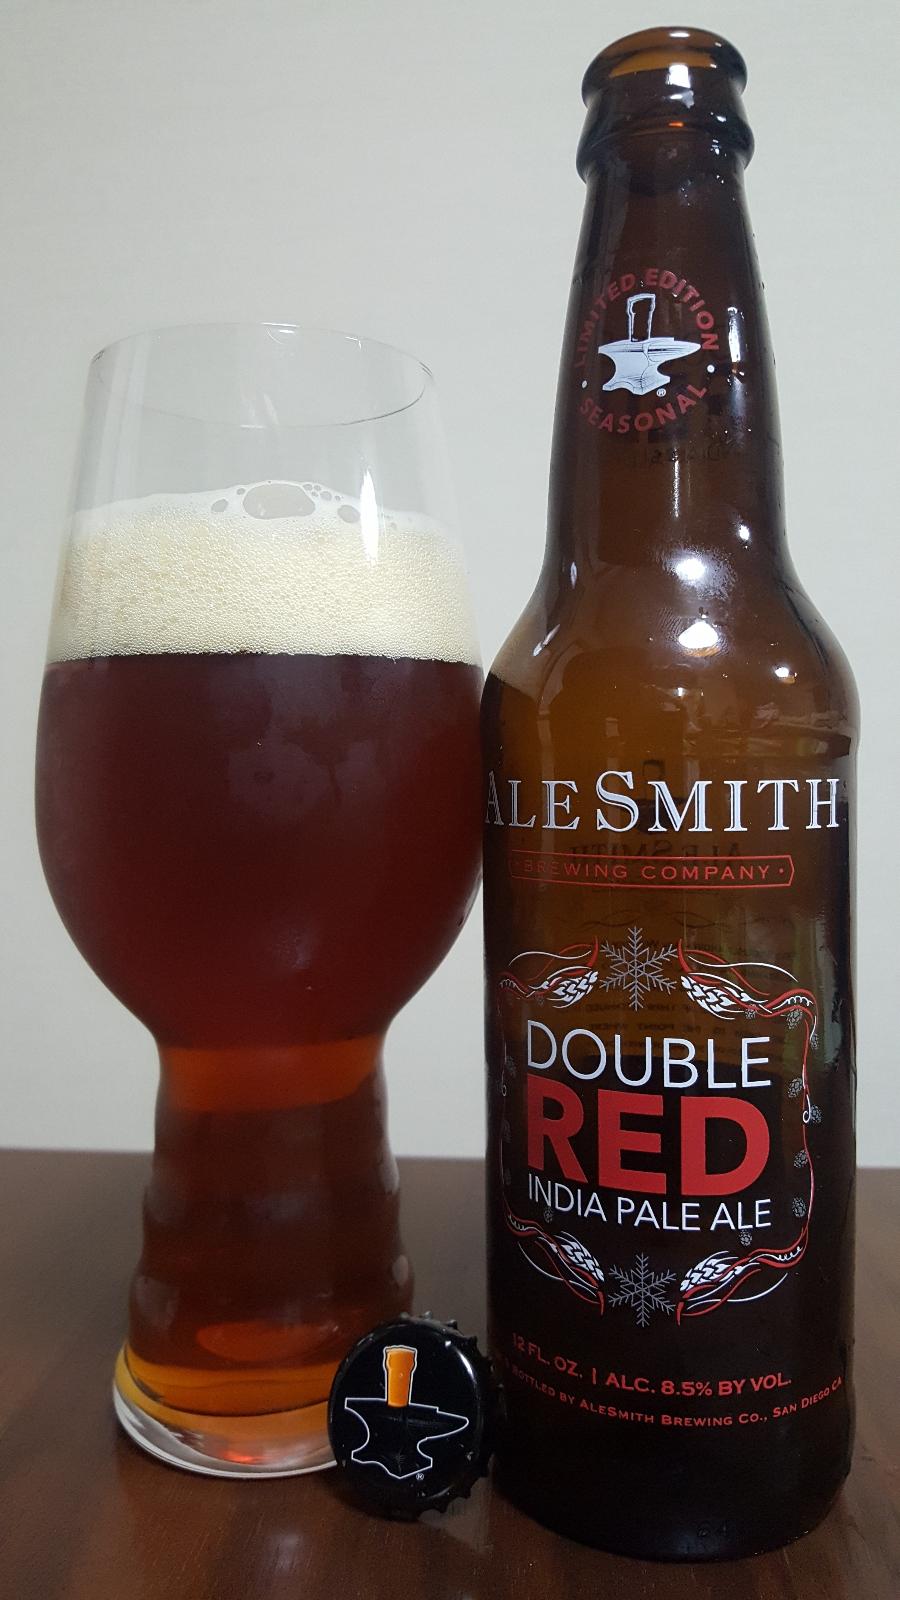 Double Red IPA